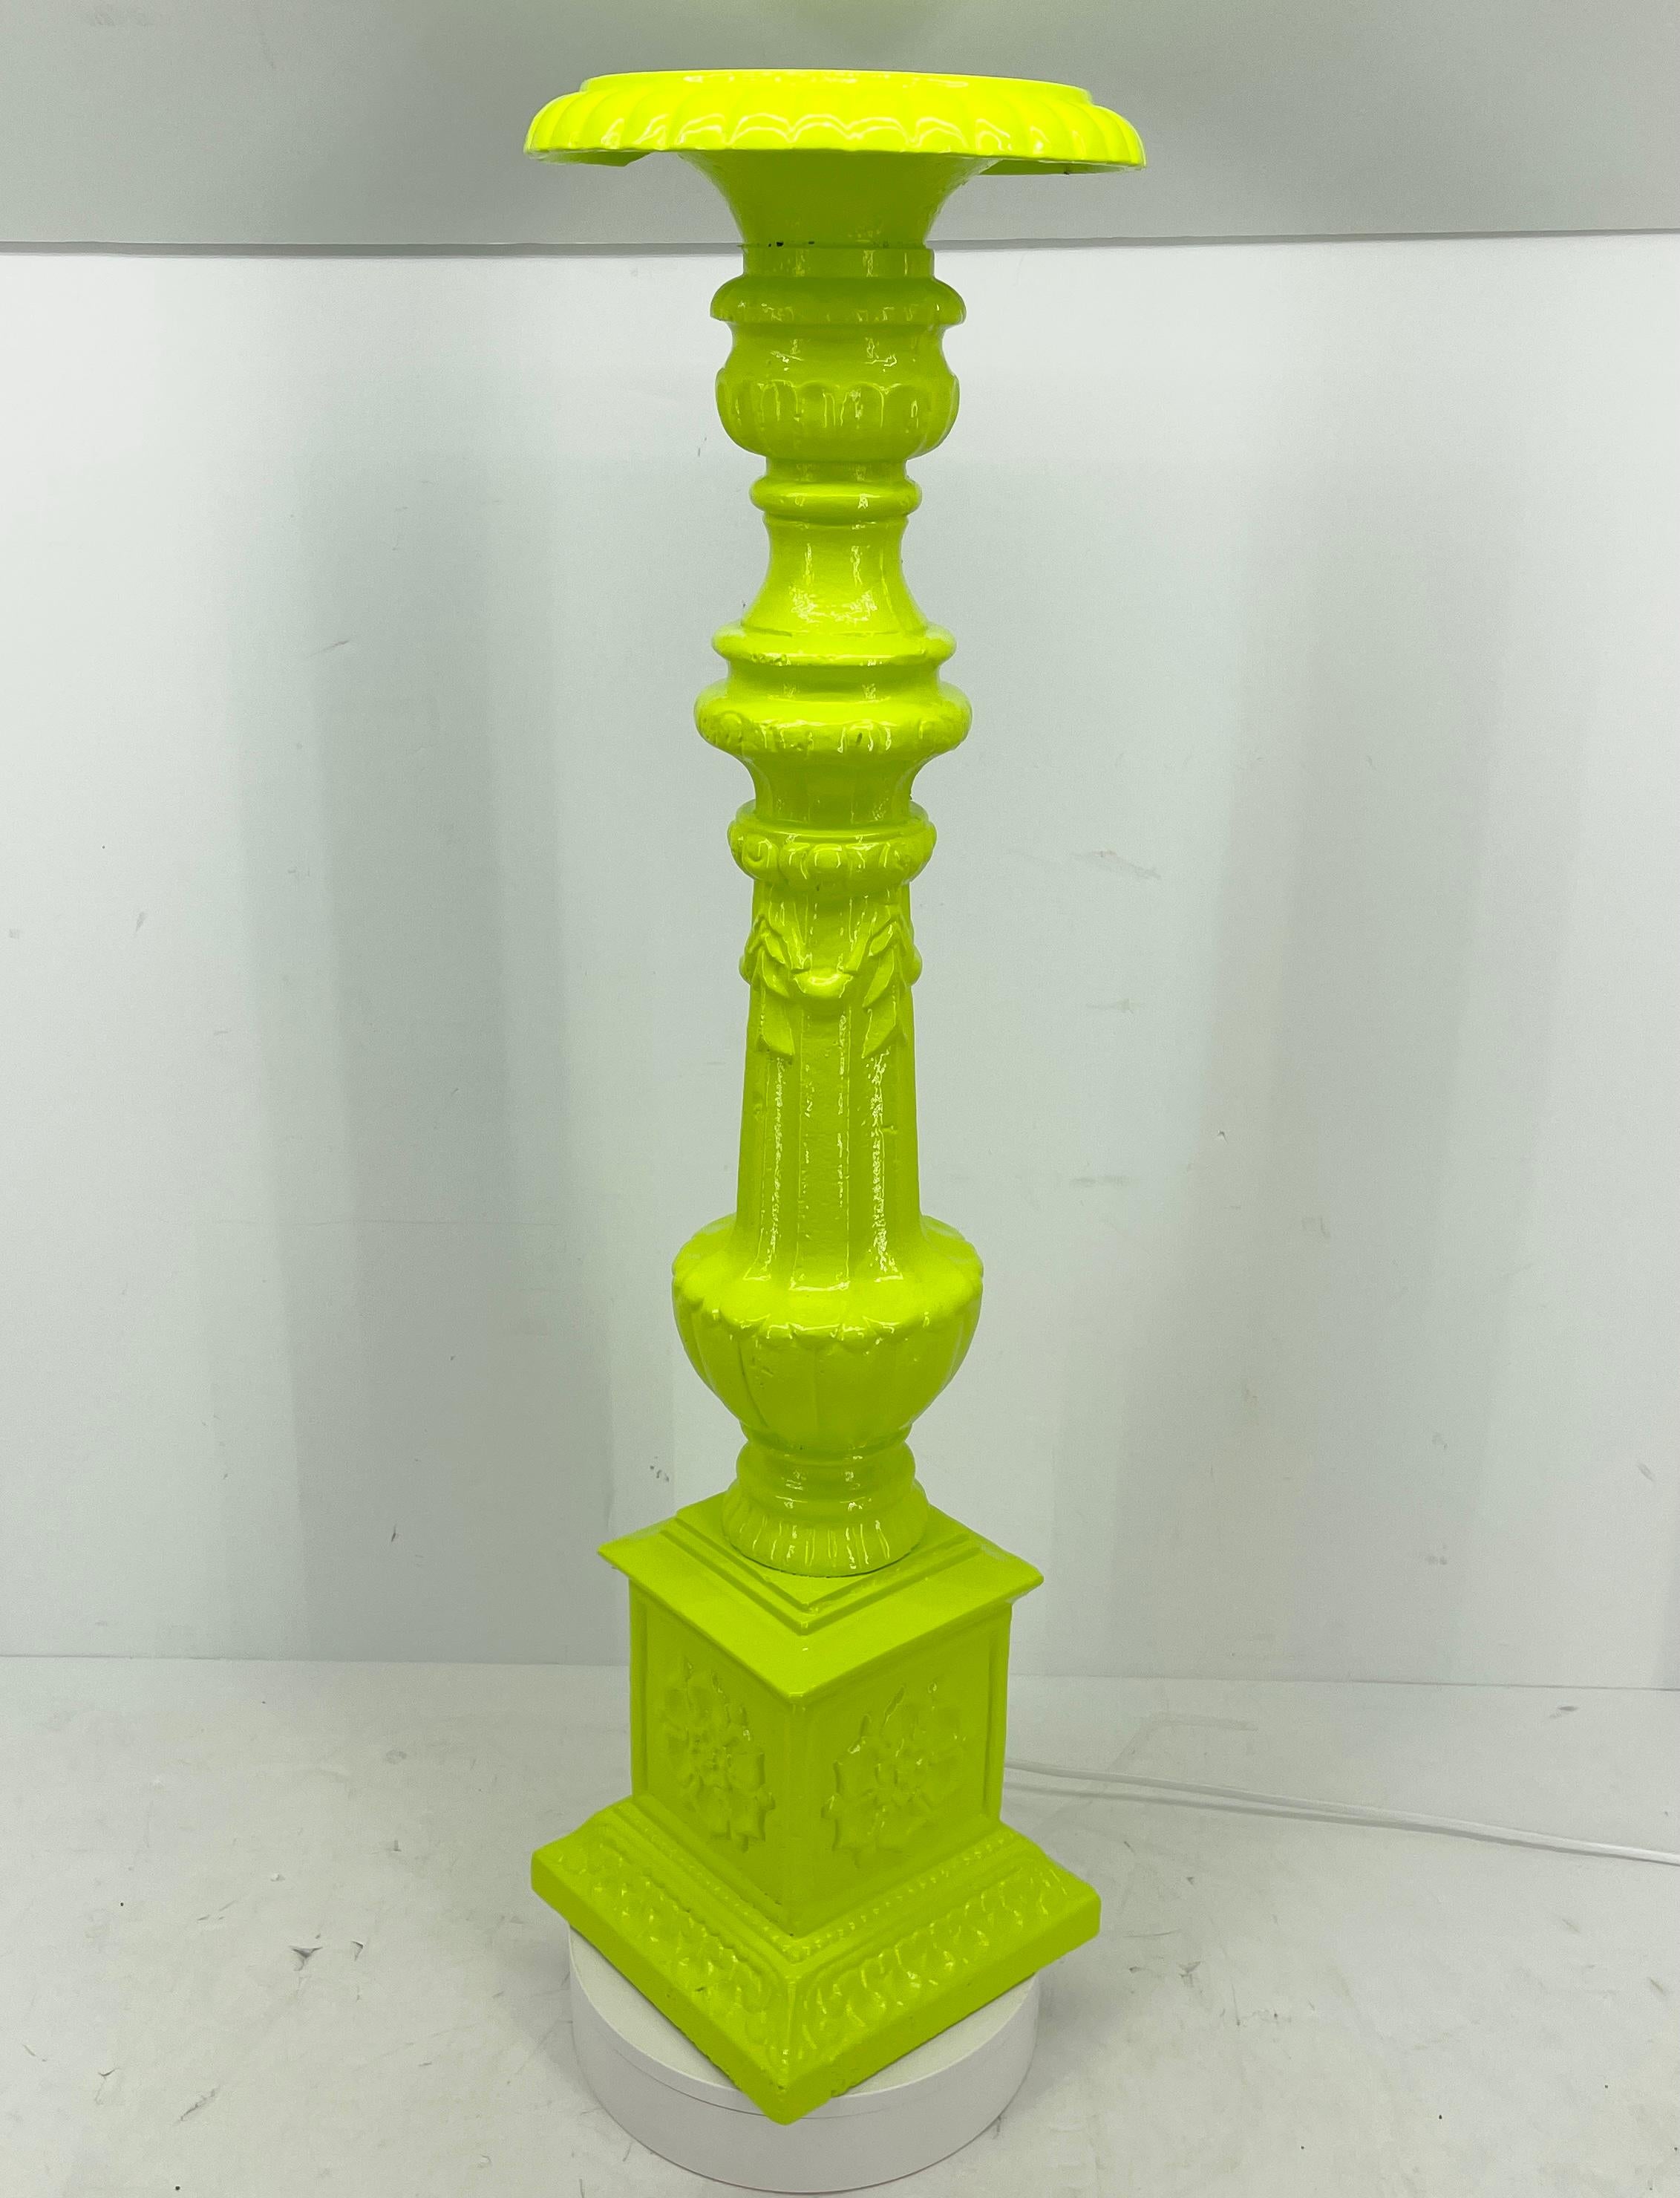 Early 1900's iron bird bath freshly powder coated in bold and bright chartreuse. Wow, this is a statement for any garden or outdoor area in a modern or classical setting. Taking a classic bird bath or pedestal and making such a bold piece is fun and